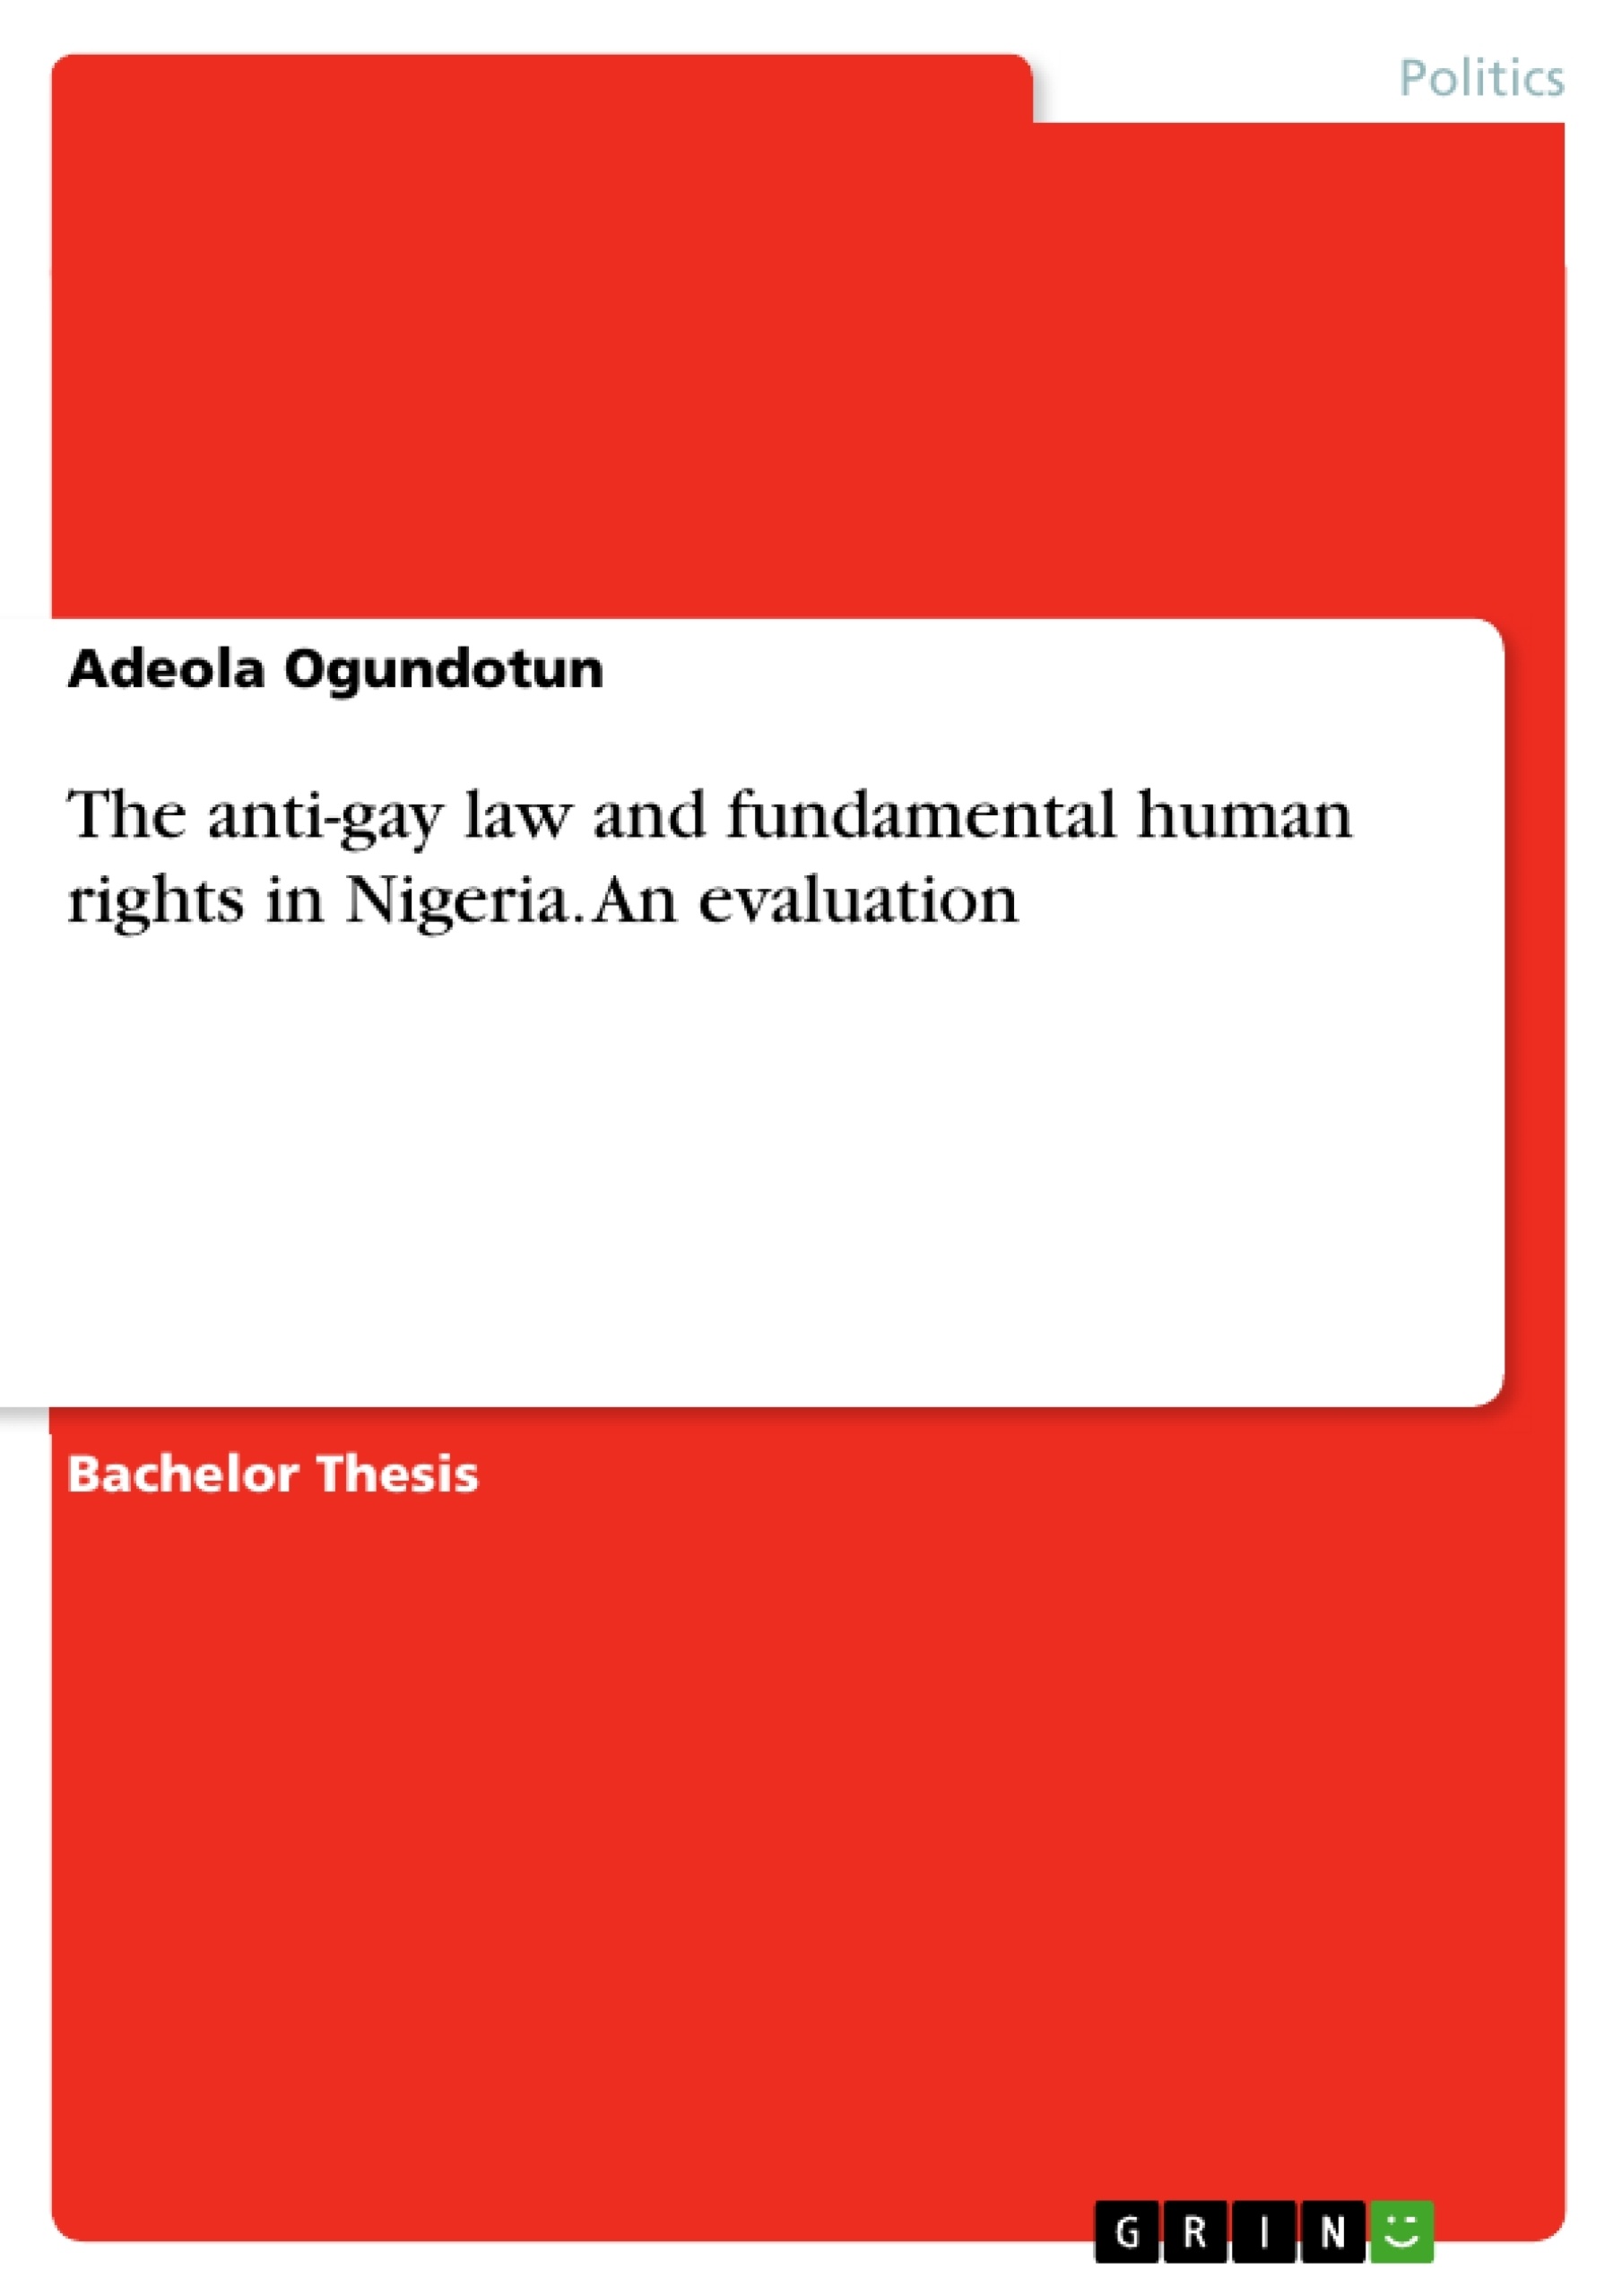 Título: The anti-gay law and fundamental human rights in Nigeria. An evaluation